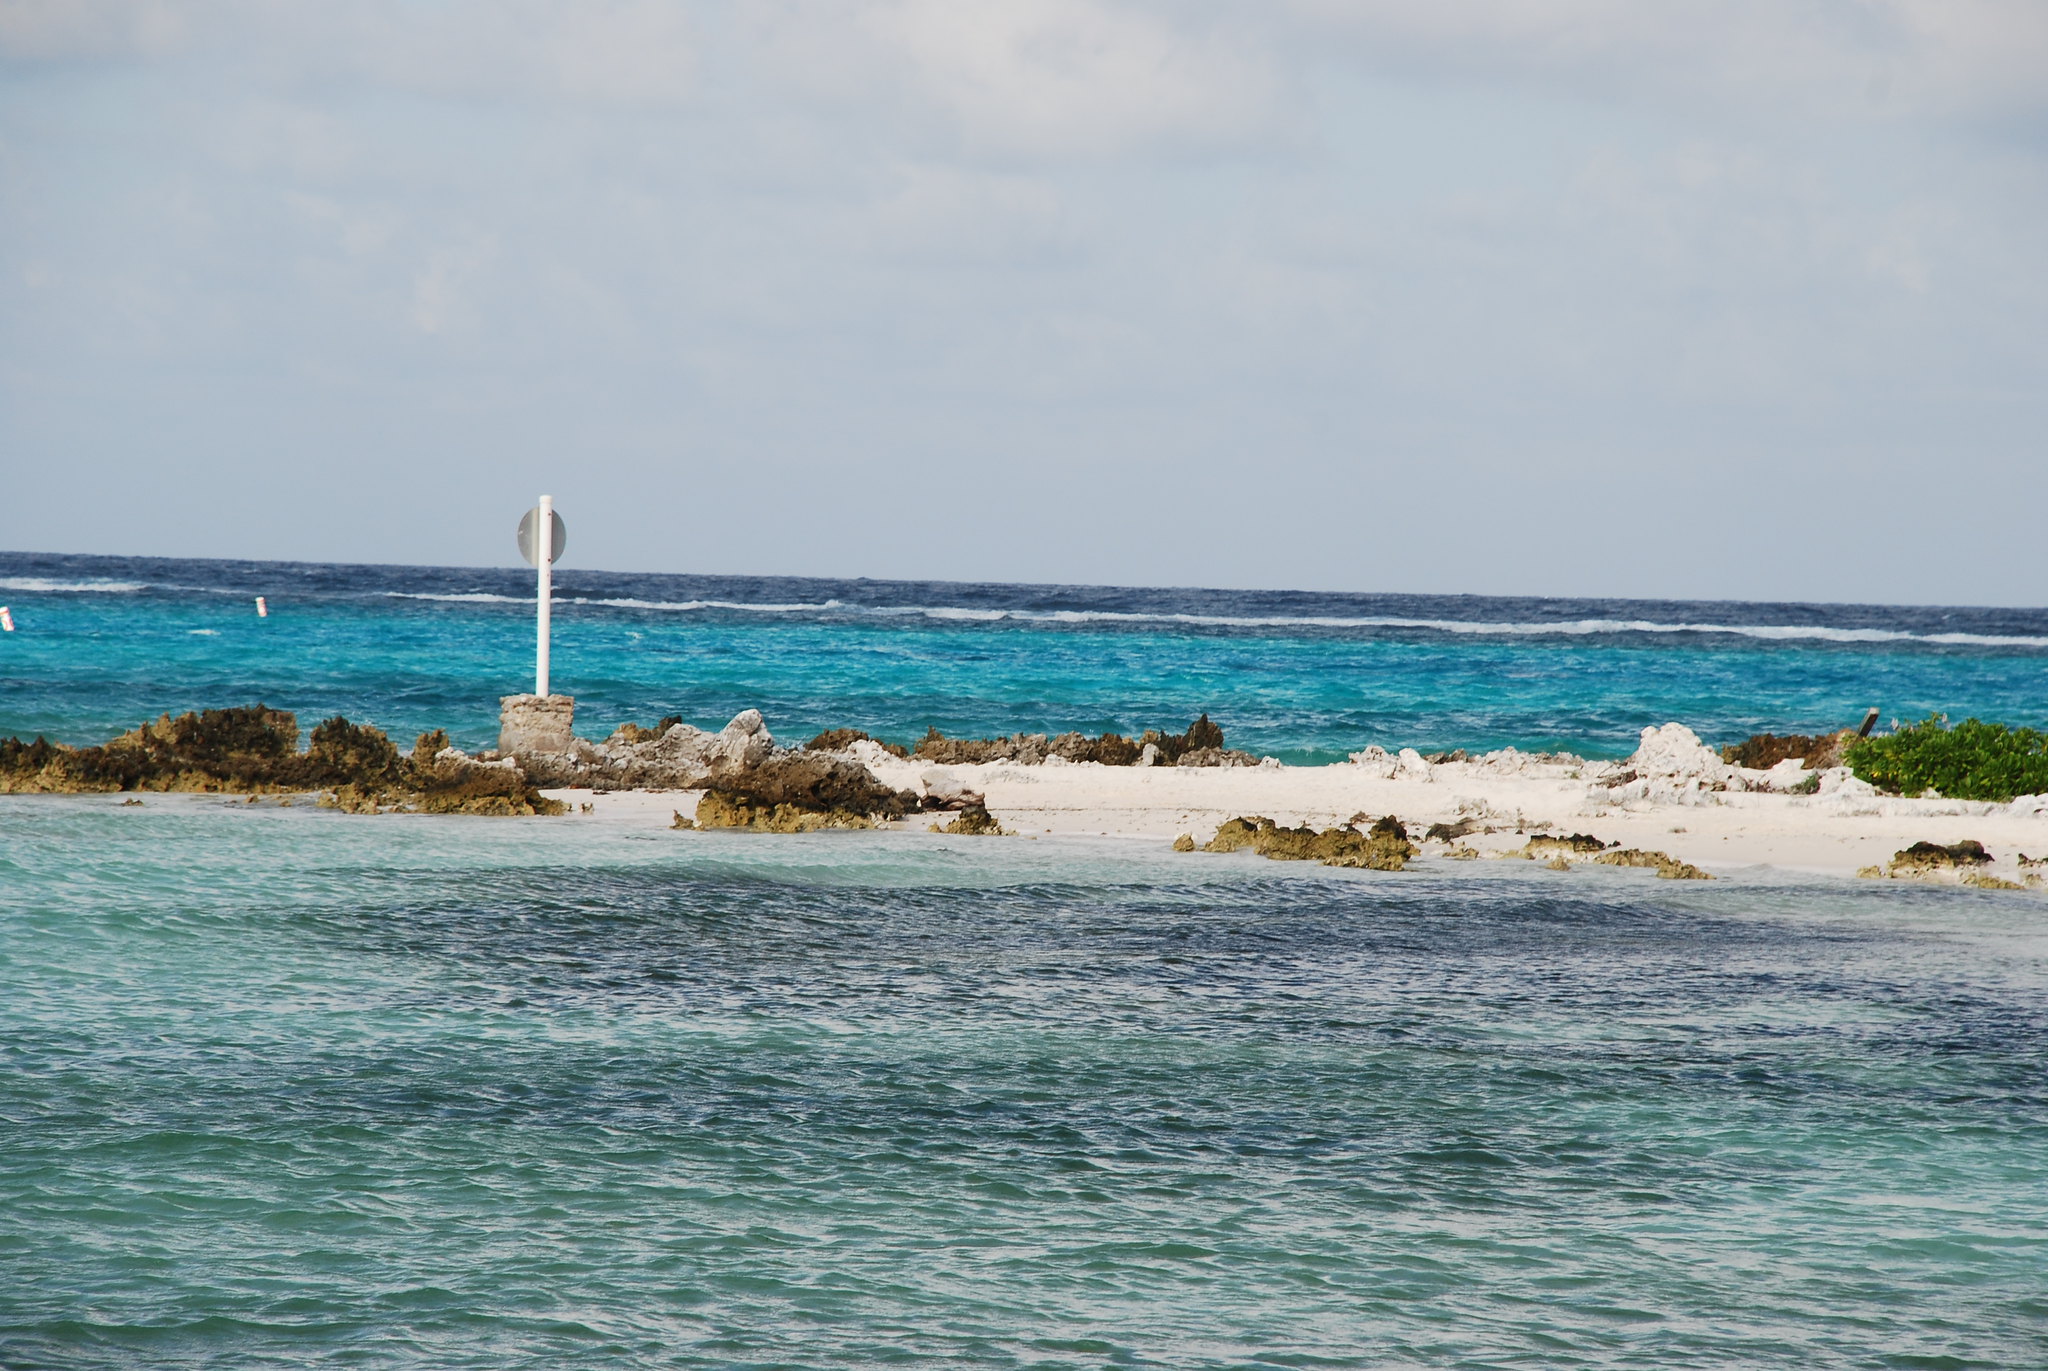 Travel Guide to the Cayman Islands